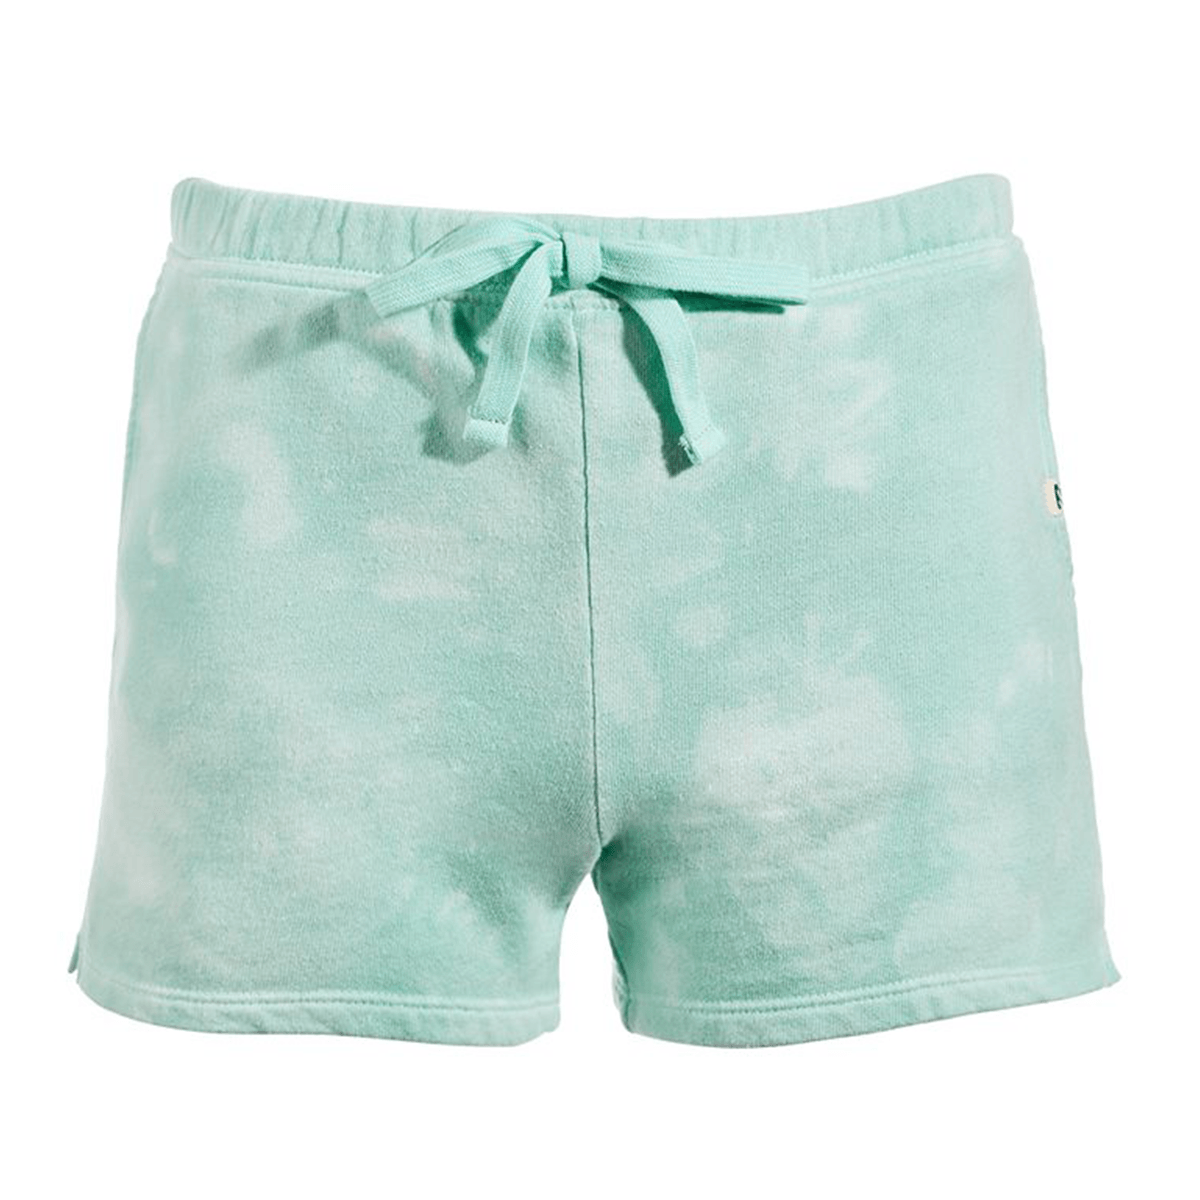 Billabong Mint to Be Girls Short in Mint Chip - BoardCo